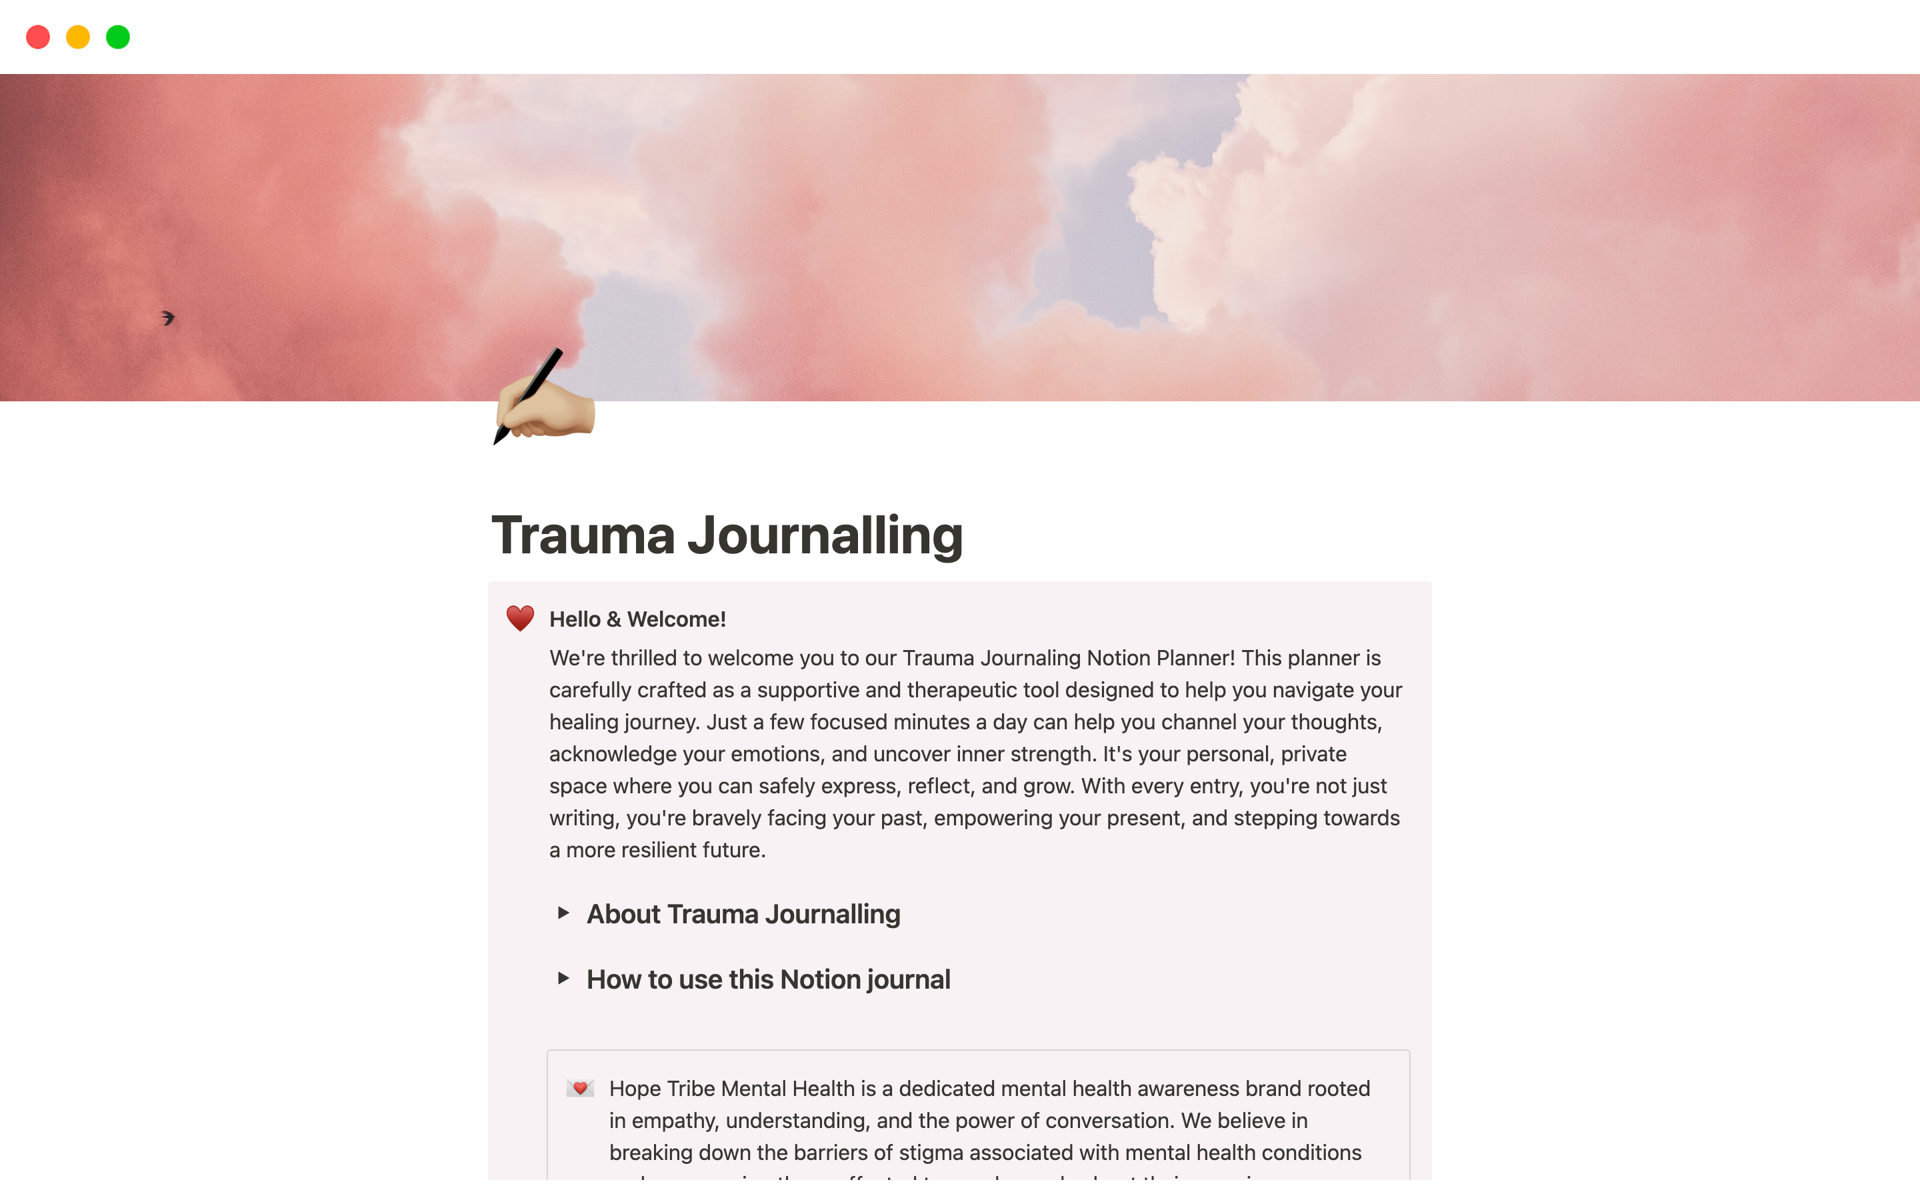 A specially designed, digital sanctuary for those navigating the complex journey of trauma healing.
This journal is more than a tool; it's a supportive companion encouraging you to articulate your thoughts, feelings, and progress in a safe, confidential space.
